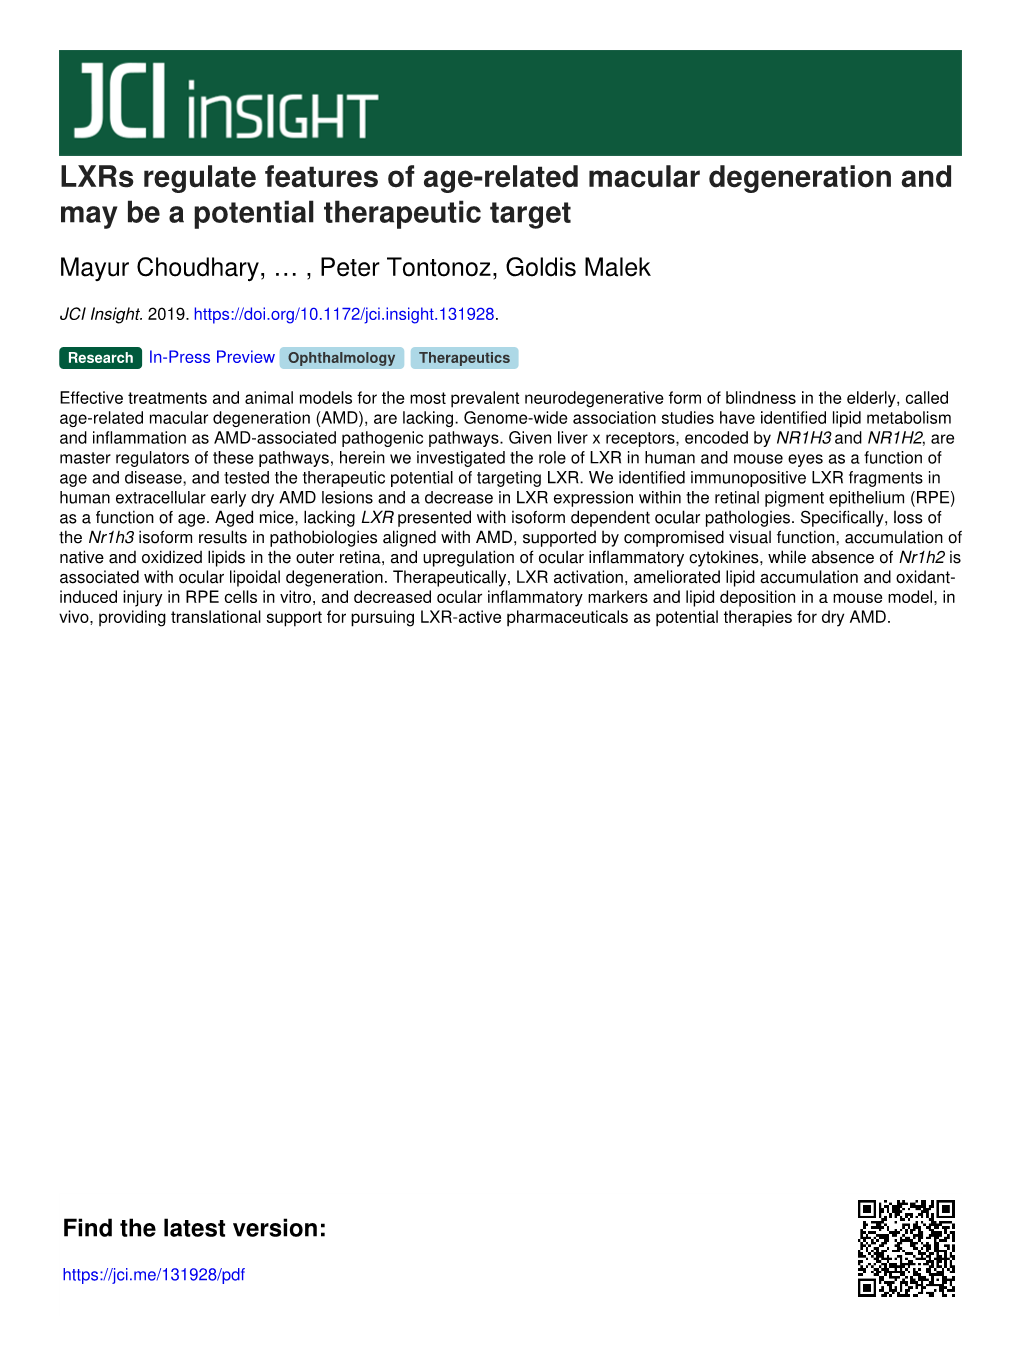 Lxrs Regulate Features of Age-Related Macular Degeneration and May Be a Potential Therapeutic Target